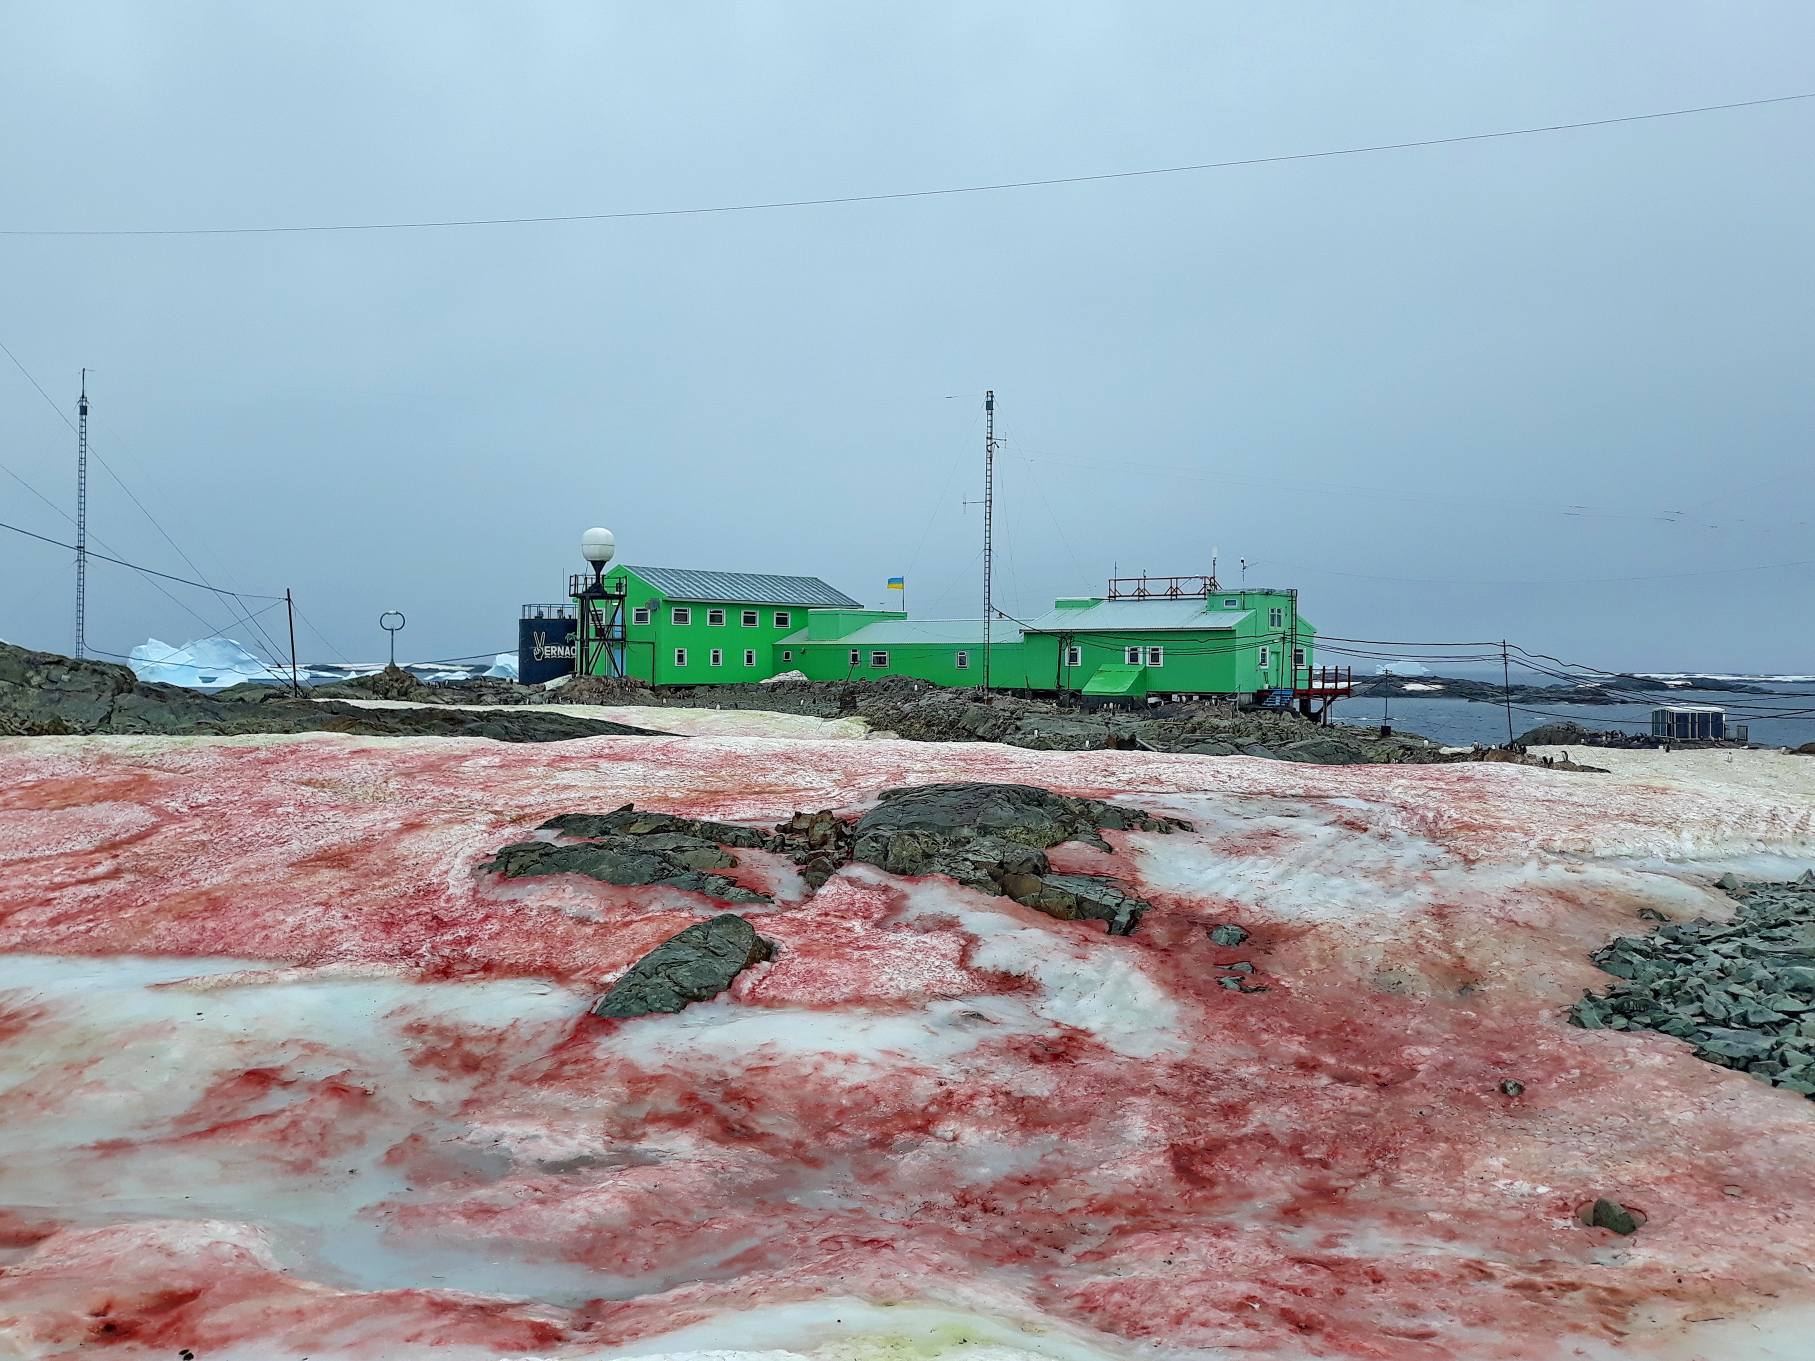 Antarctica snow turns blood-red: Bad signs of climate change visible